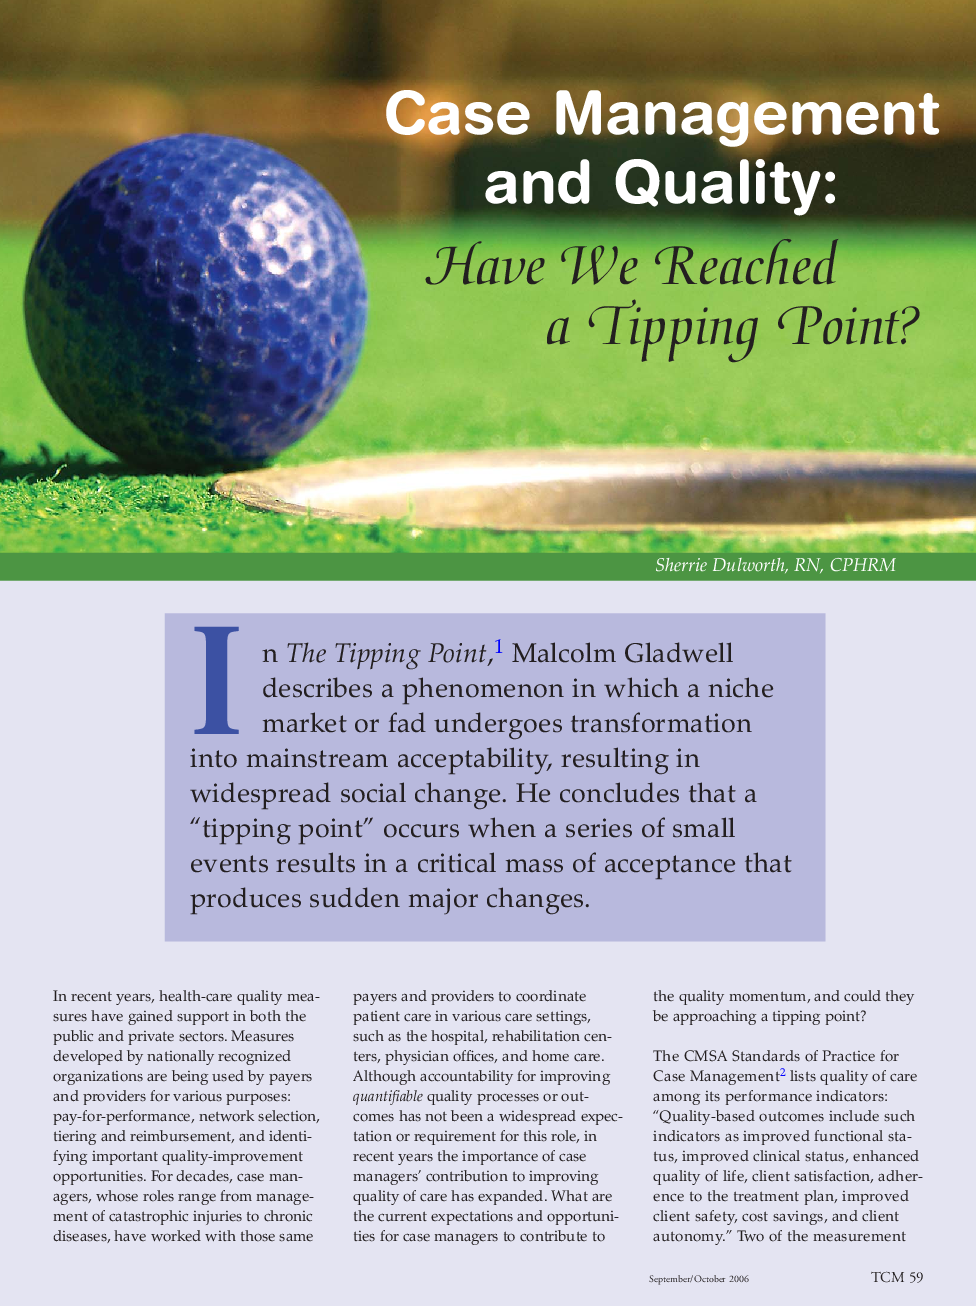 Case management and quality: Have we reached a tipping point? 